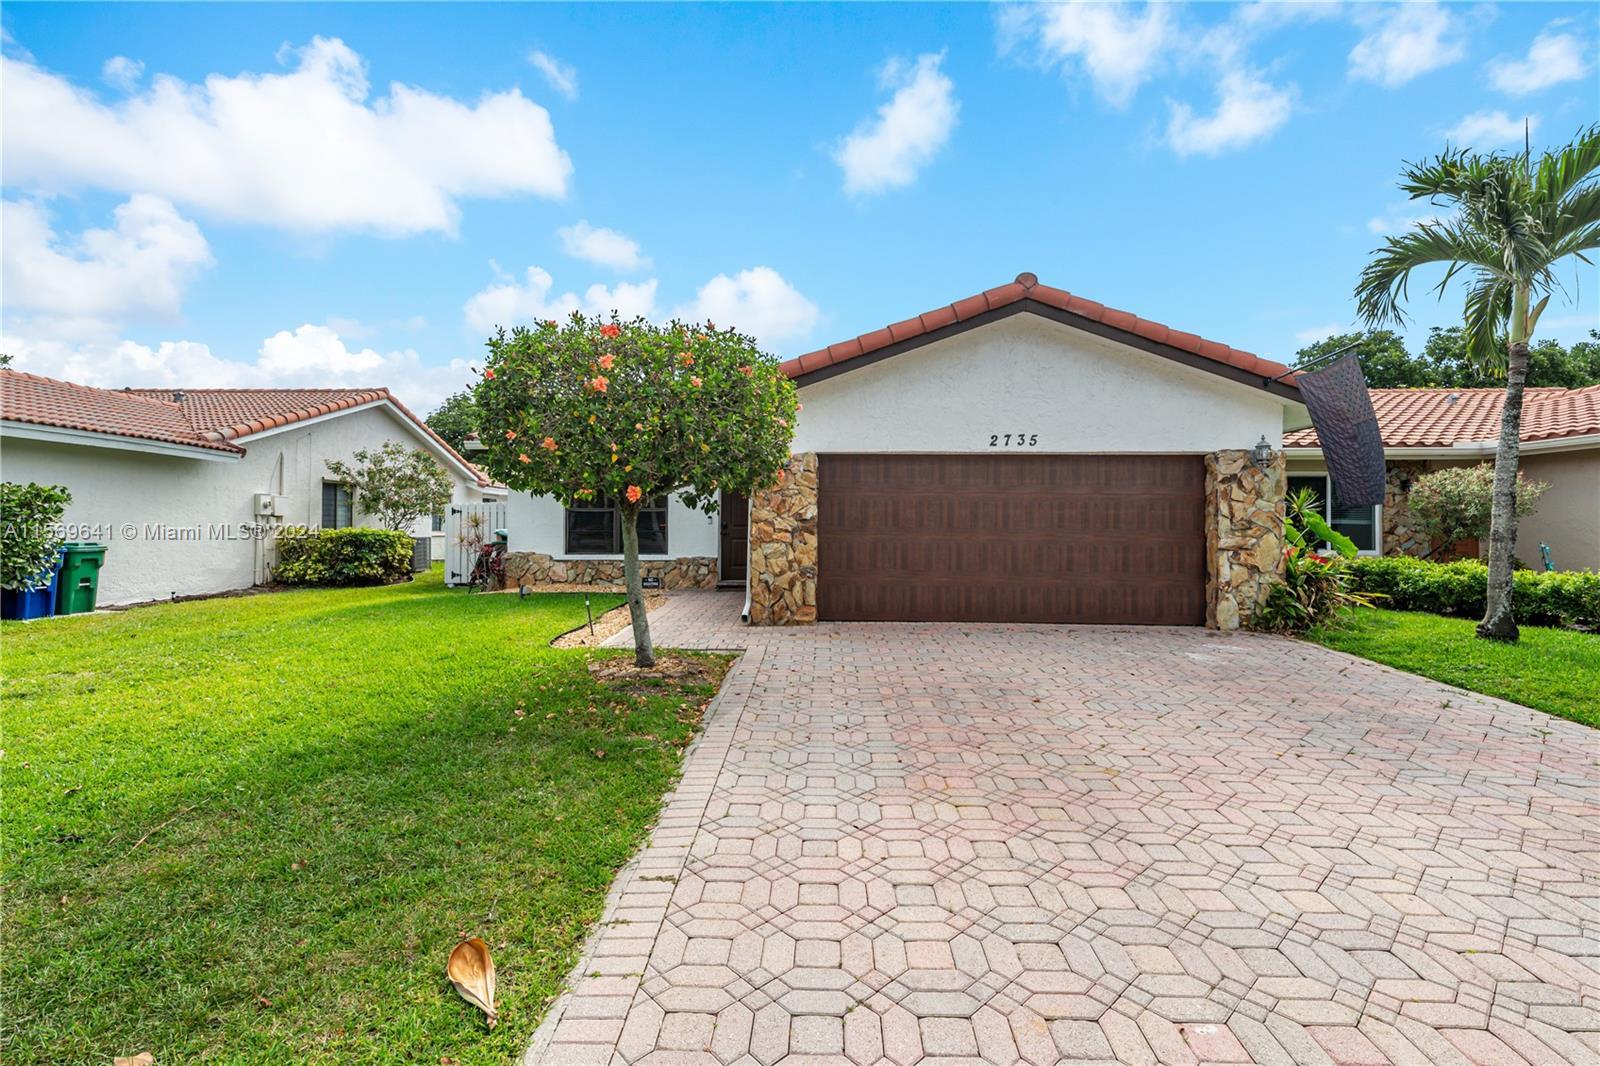 Photo of 2735 NW 92nd Ave in Coral Springs, FL